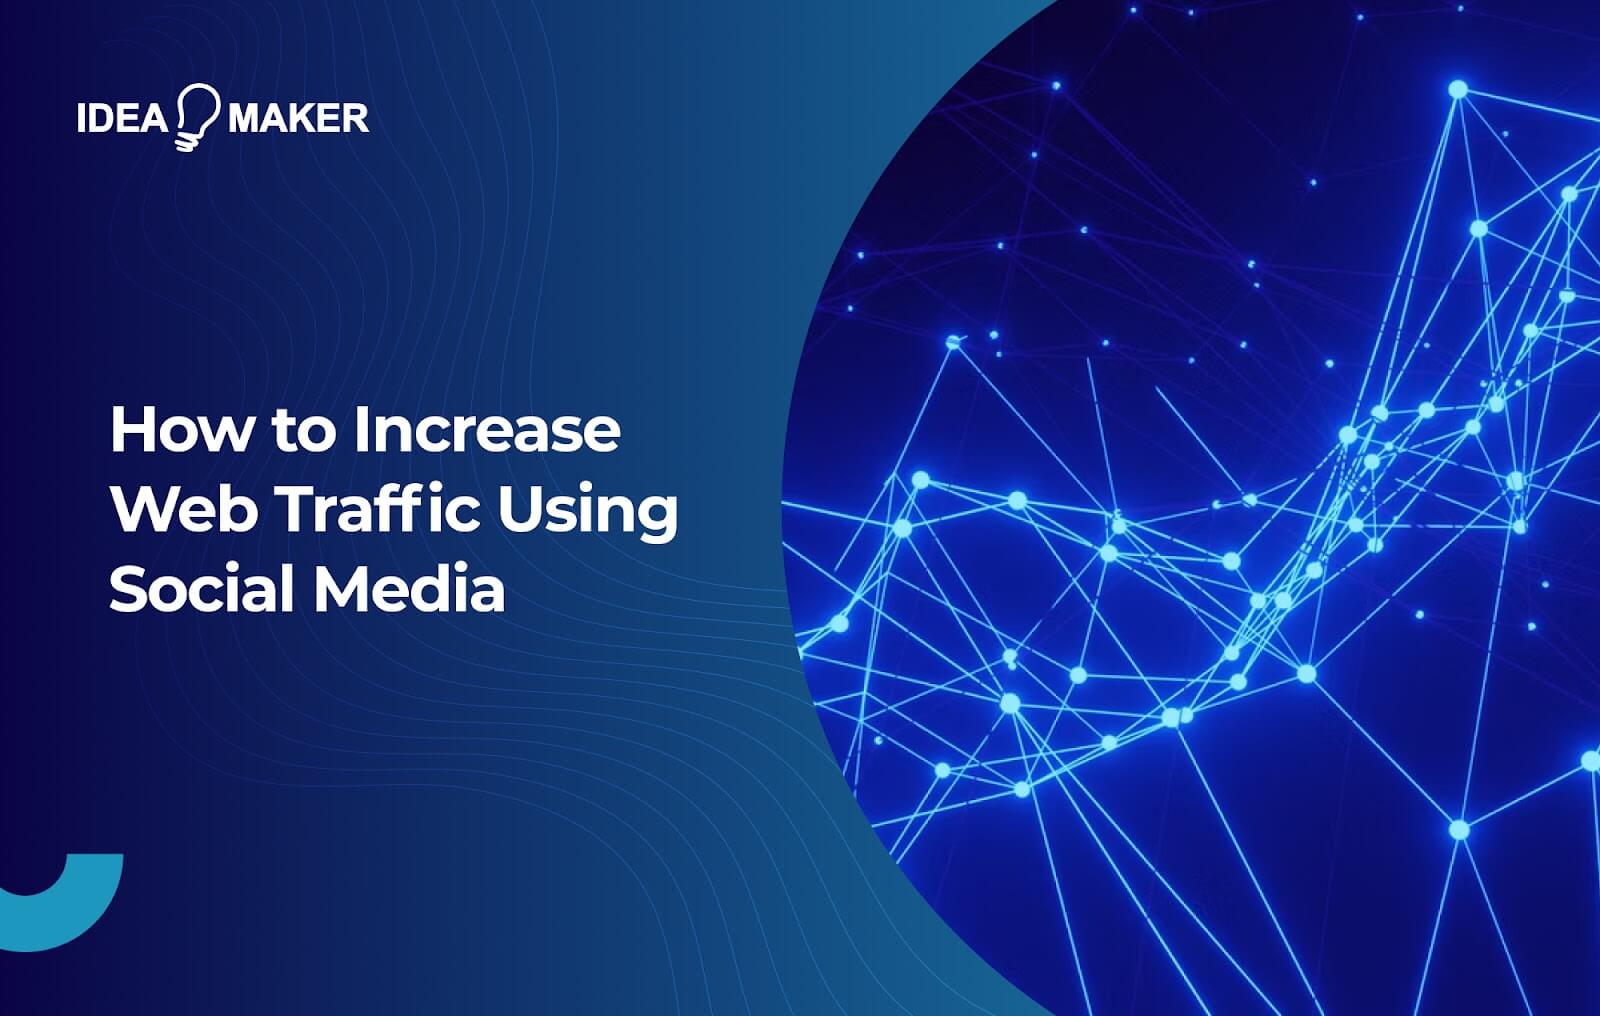 Ideamaker - How to Increase Web Traffic